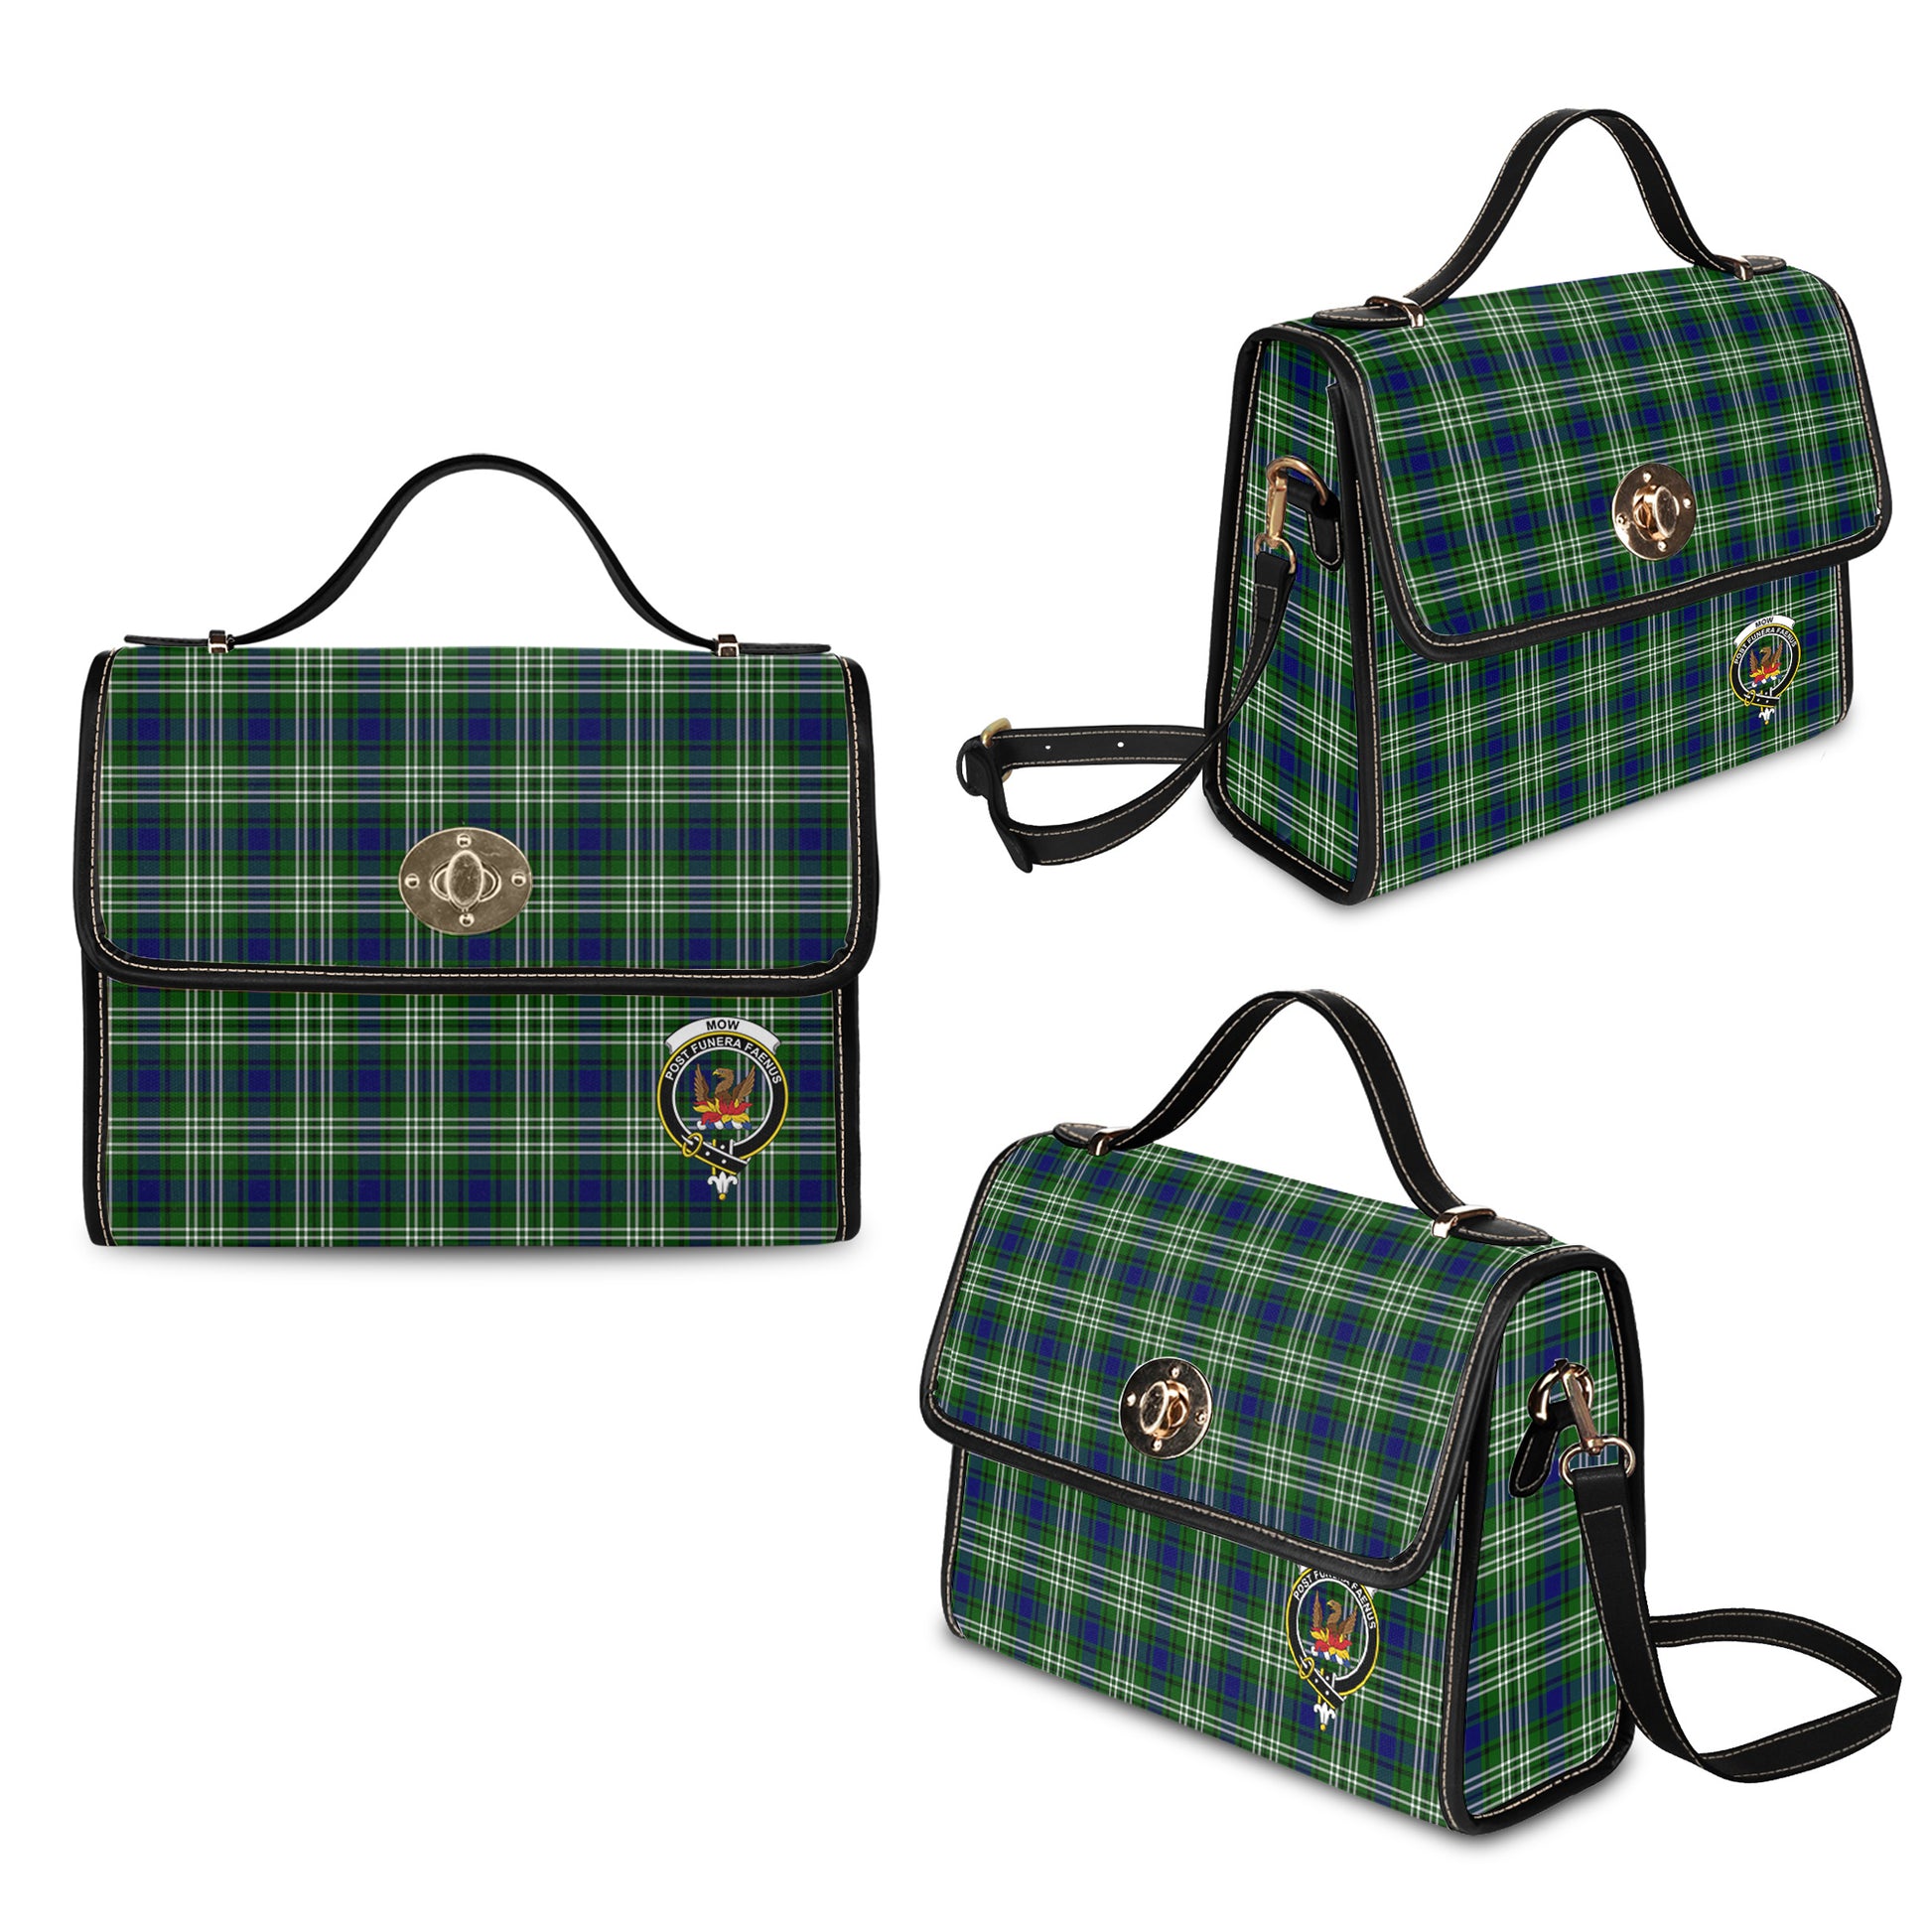 mow-tartan-leather-strap-waterproof-canvas-bag-with-family-crest